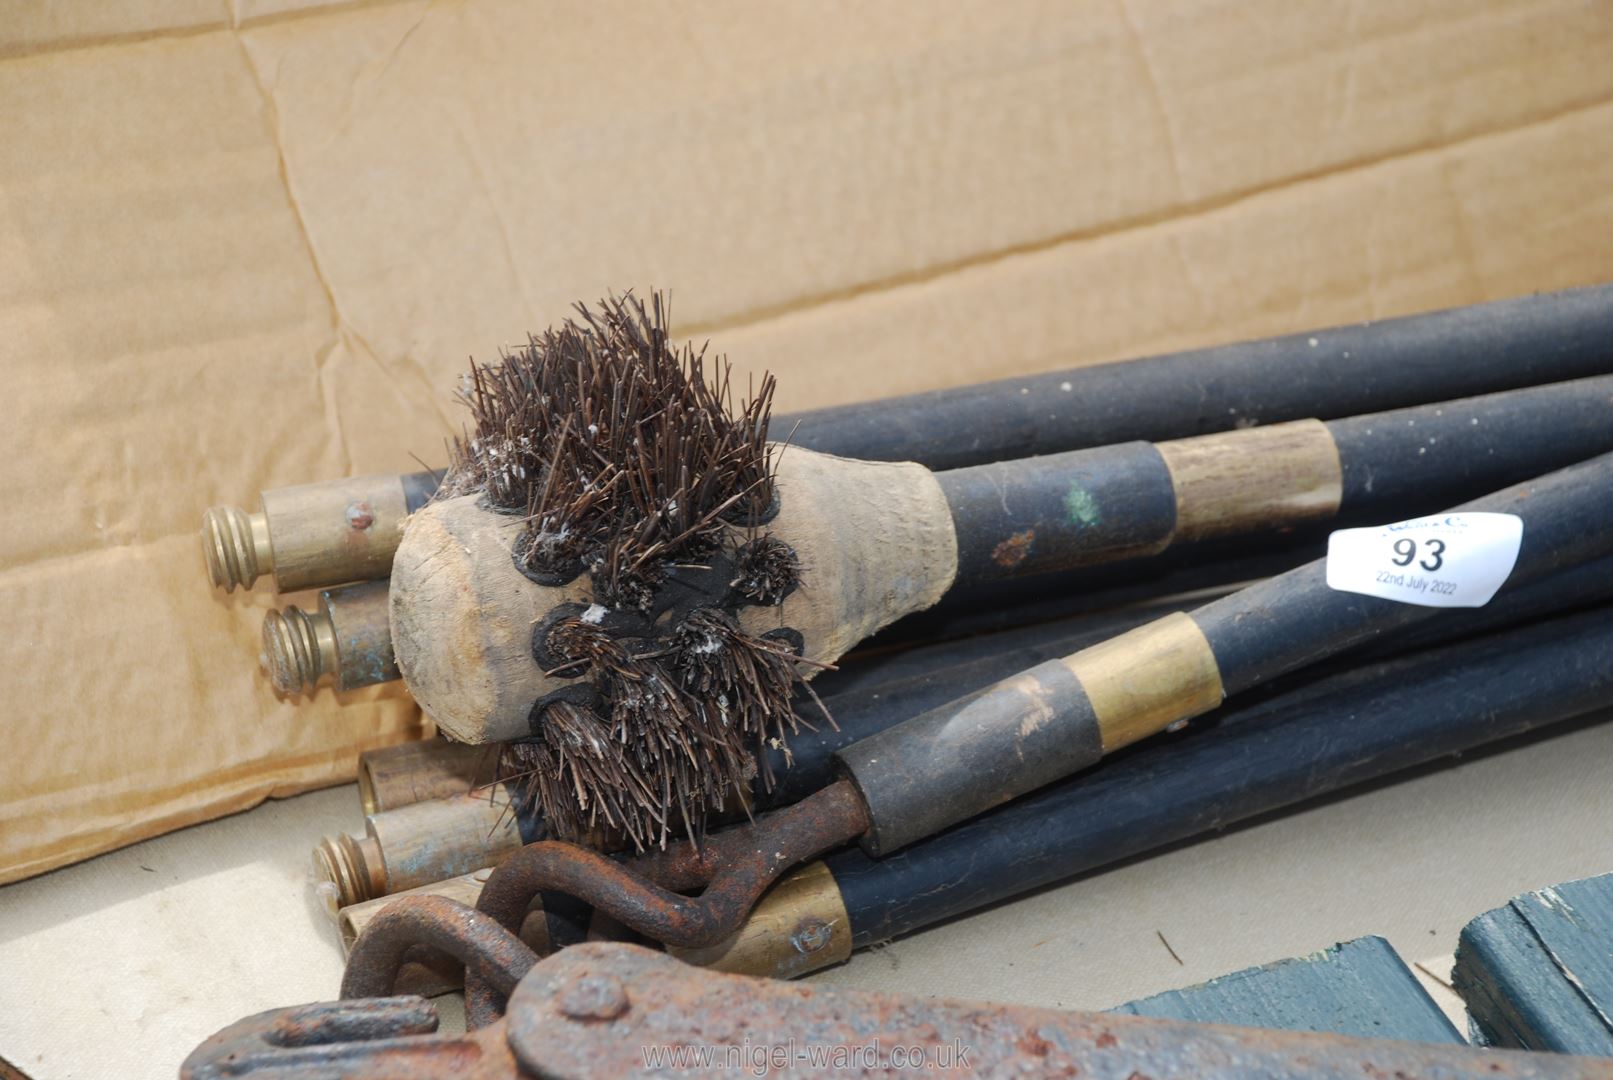 A quantity of drain rods. - Image 2 of 2